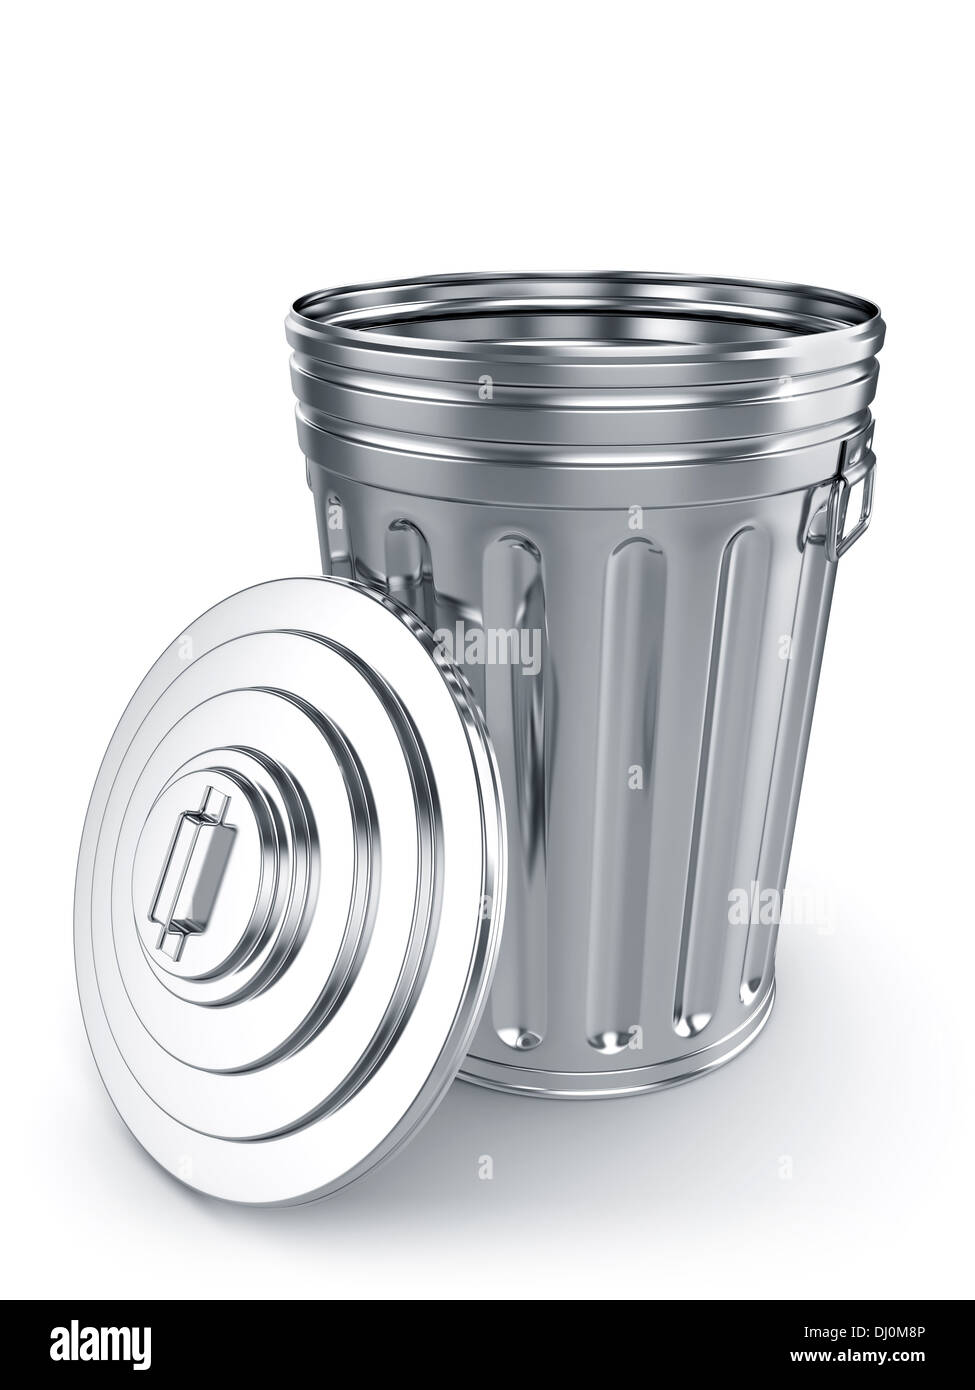 https://c8.alamy.com/comp/DJ0M8P/3d-render-of-opened-trash-can-isolated-on-white-background-DJ0M8P.jpg